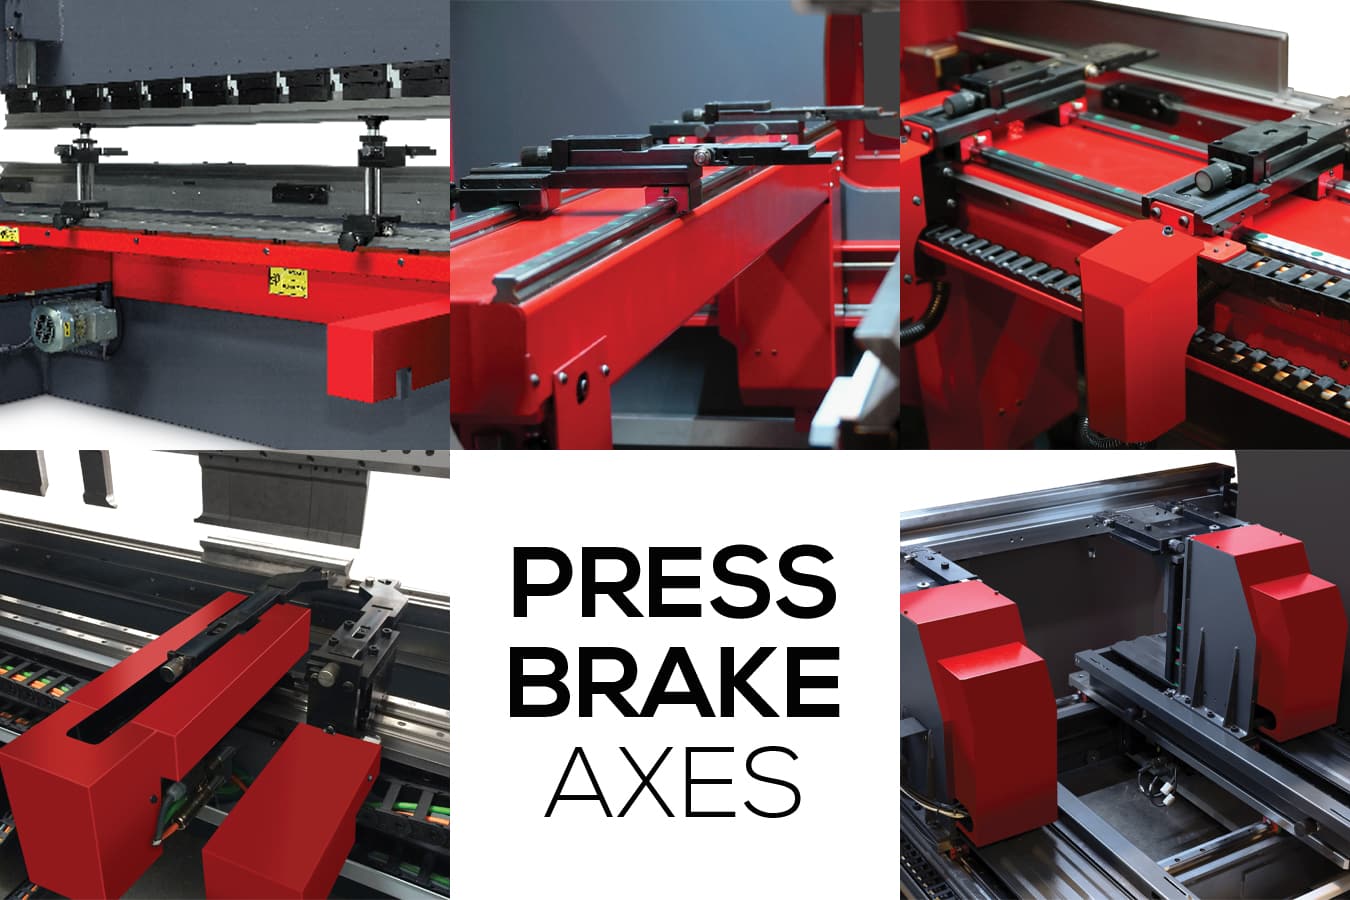 How Many Axes Should a Press Brake Have?